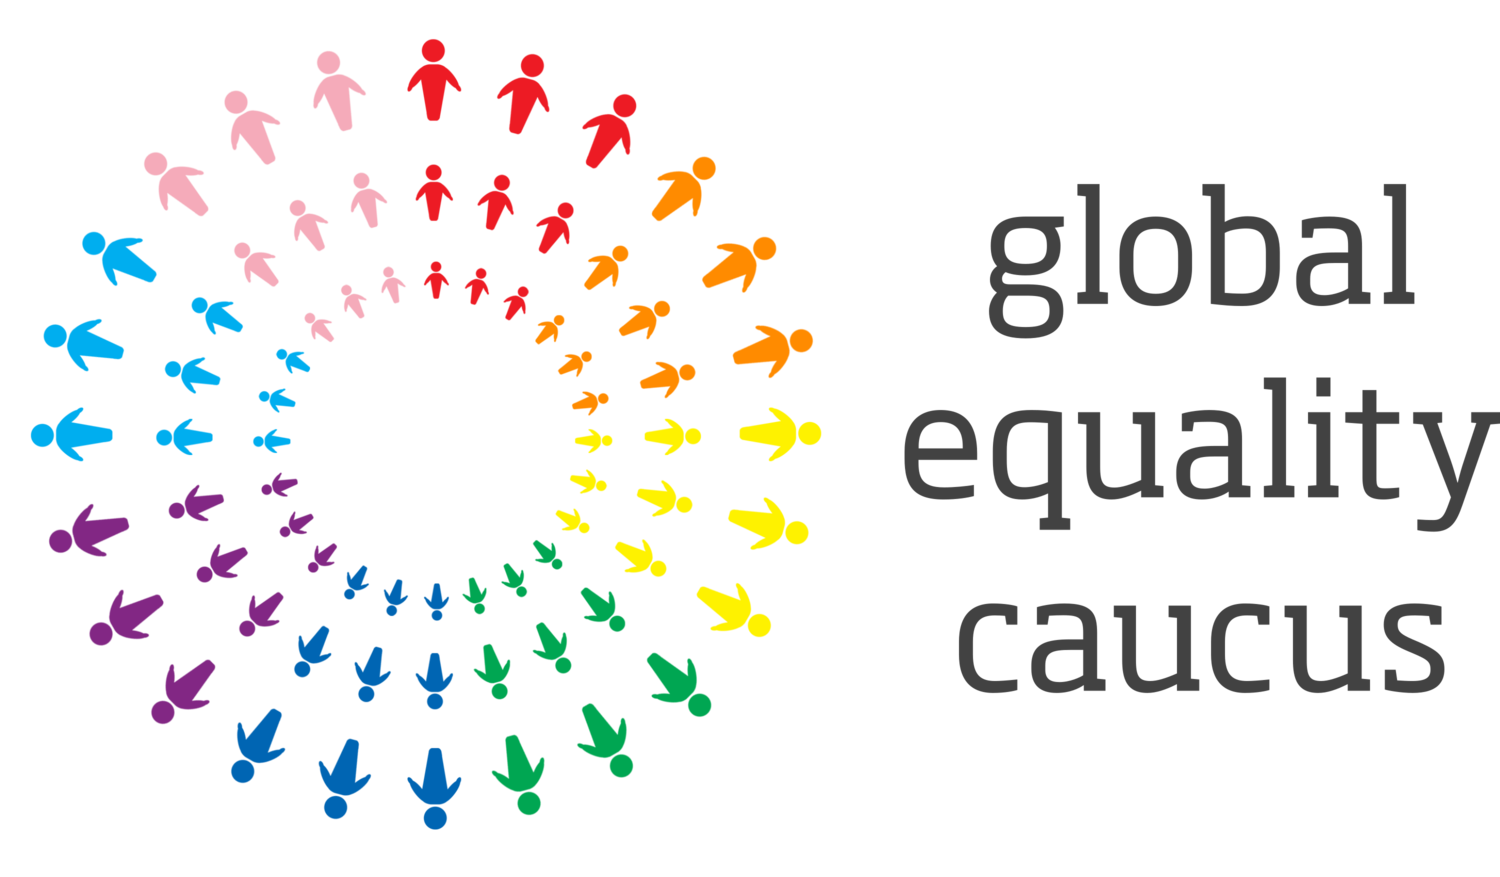 global equality caucus.png